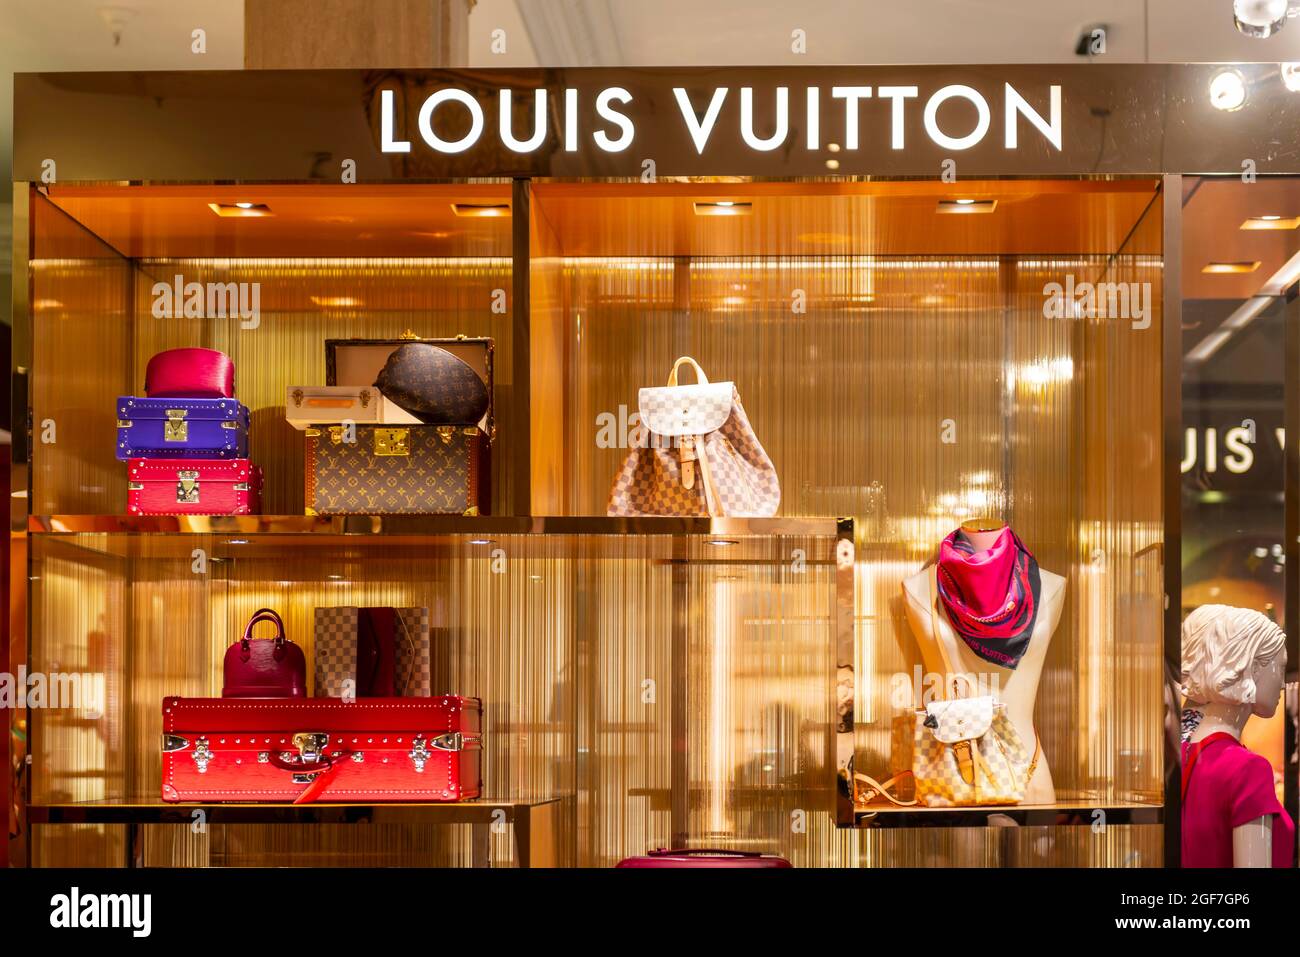 Harrods - The new Louis Vuitton store (Ground Floor). Photography